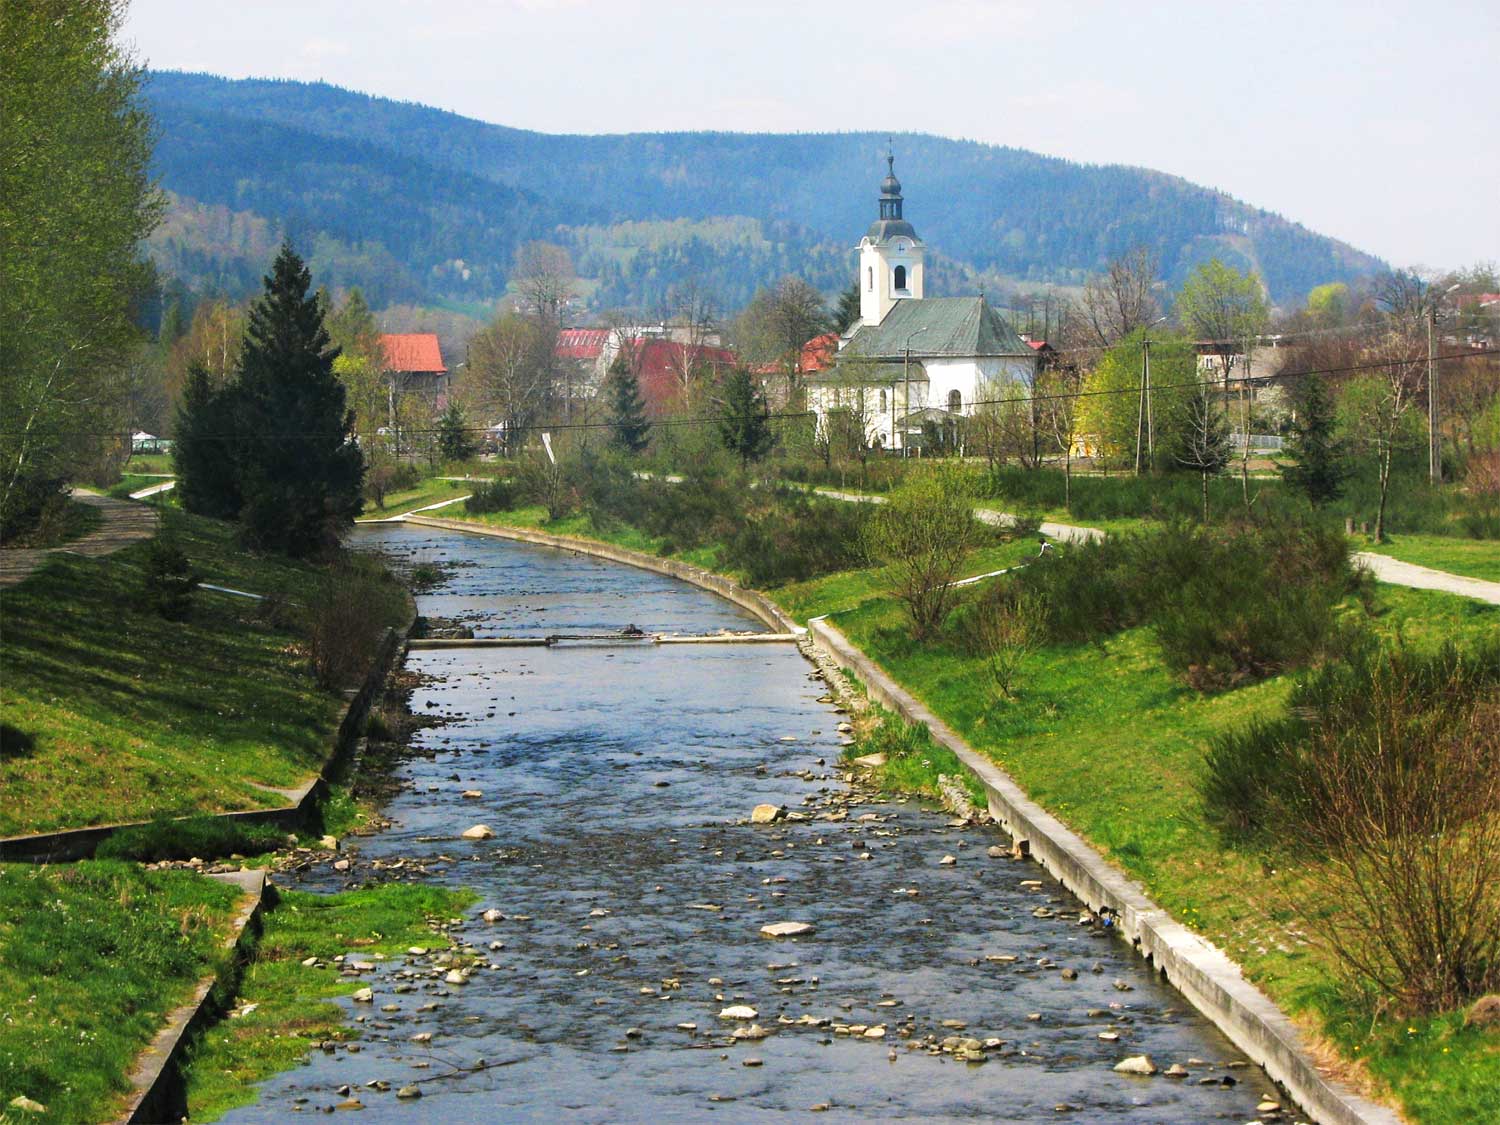 Brennica River in the beautiful town of Brenna